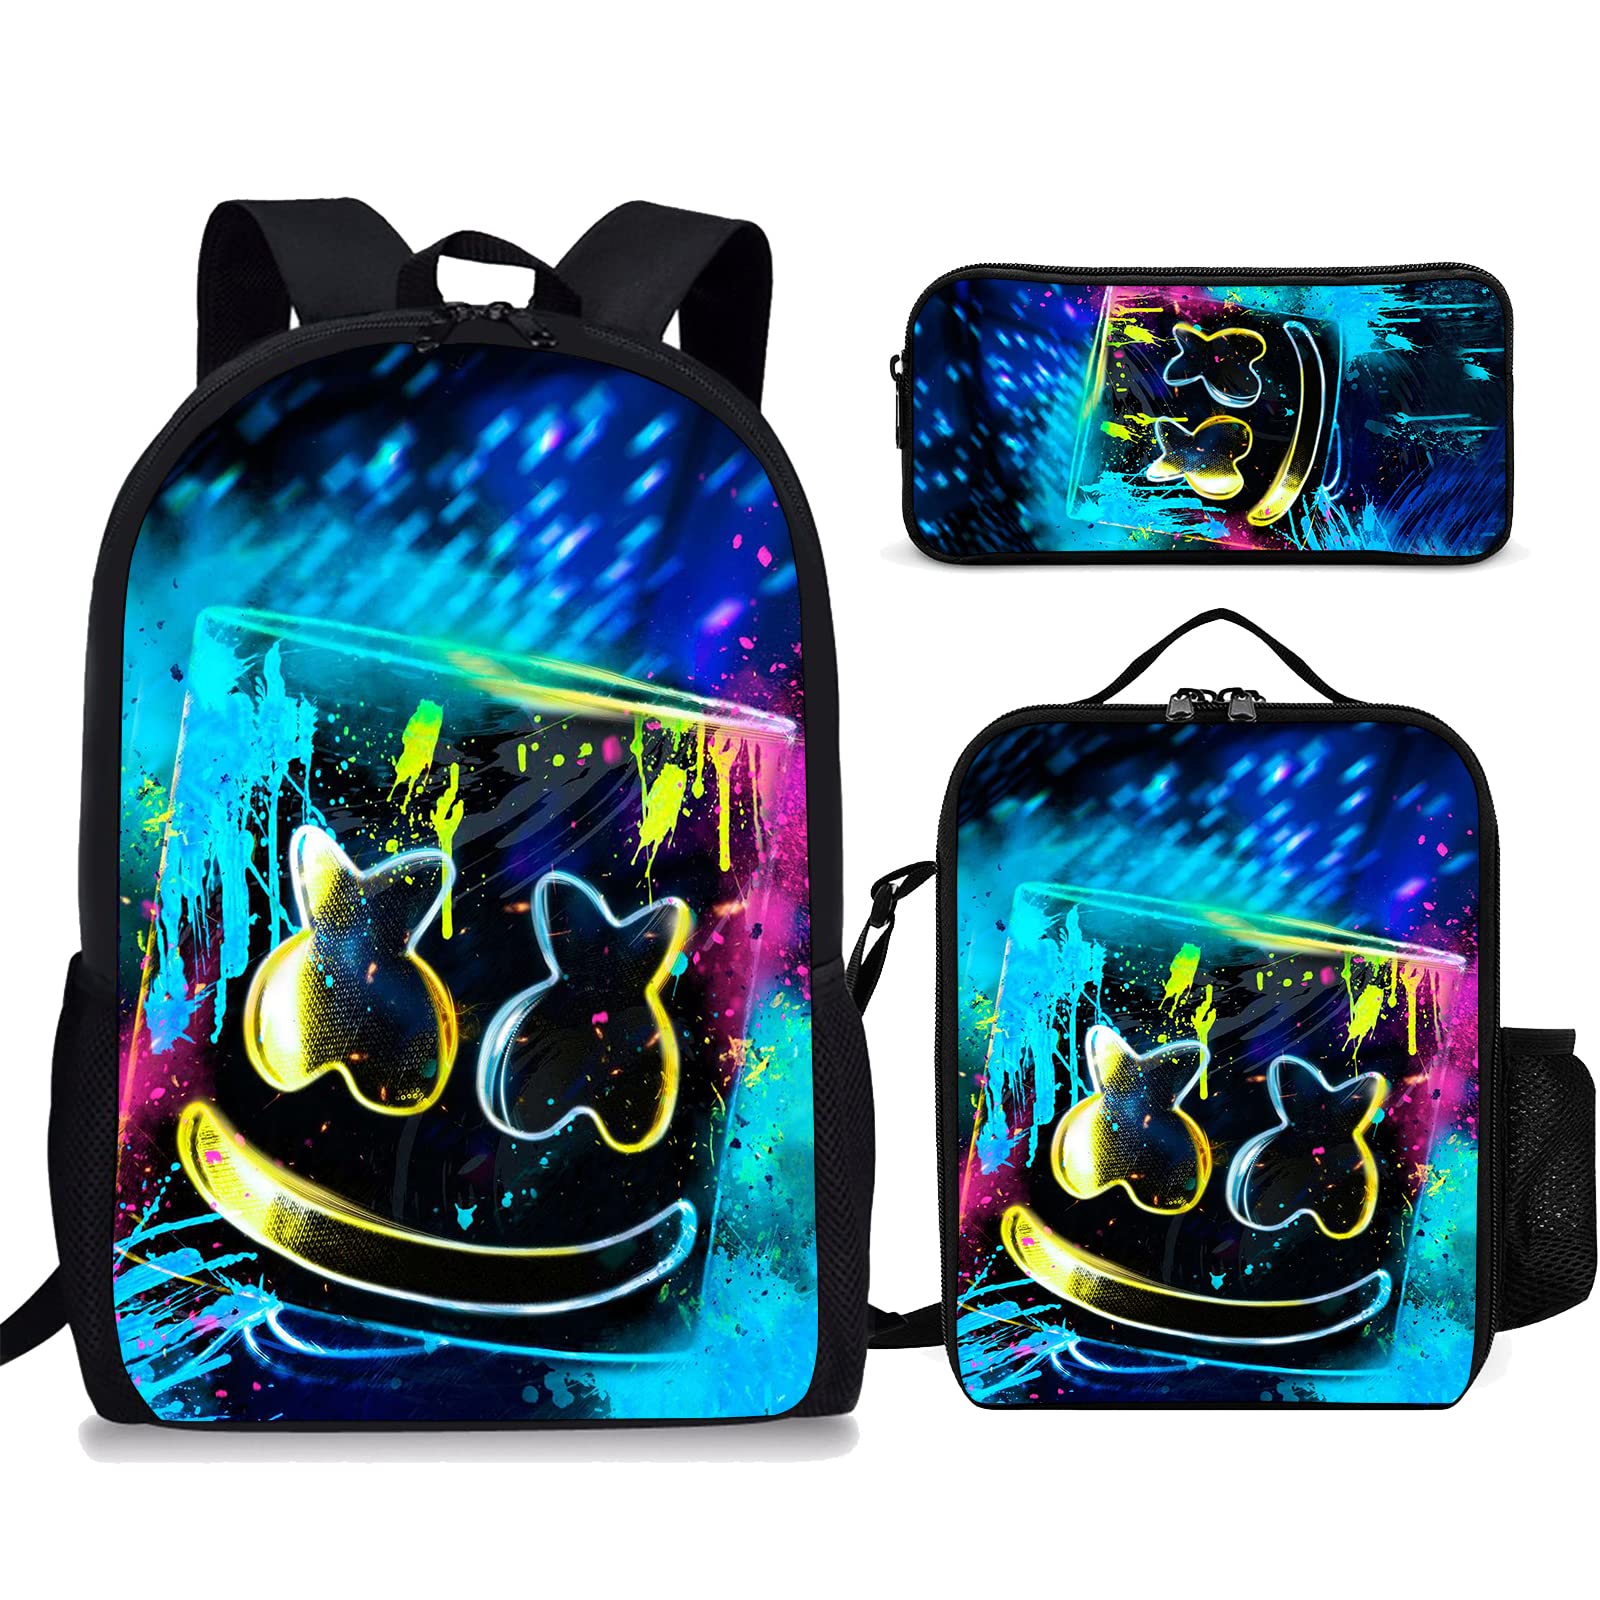 MDZZ Backpack Marshmallow Backpack School Backpacks For Teenagers Boys  Girls Student Bags Usb Multifunction Travel Luminous Bag Laptop Pack  CG5222: Buy Online at Best Price in UAE - Amazon.ae